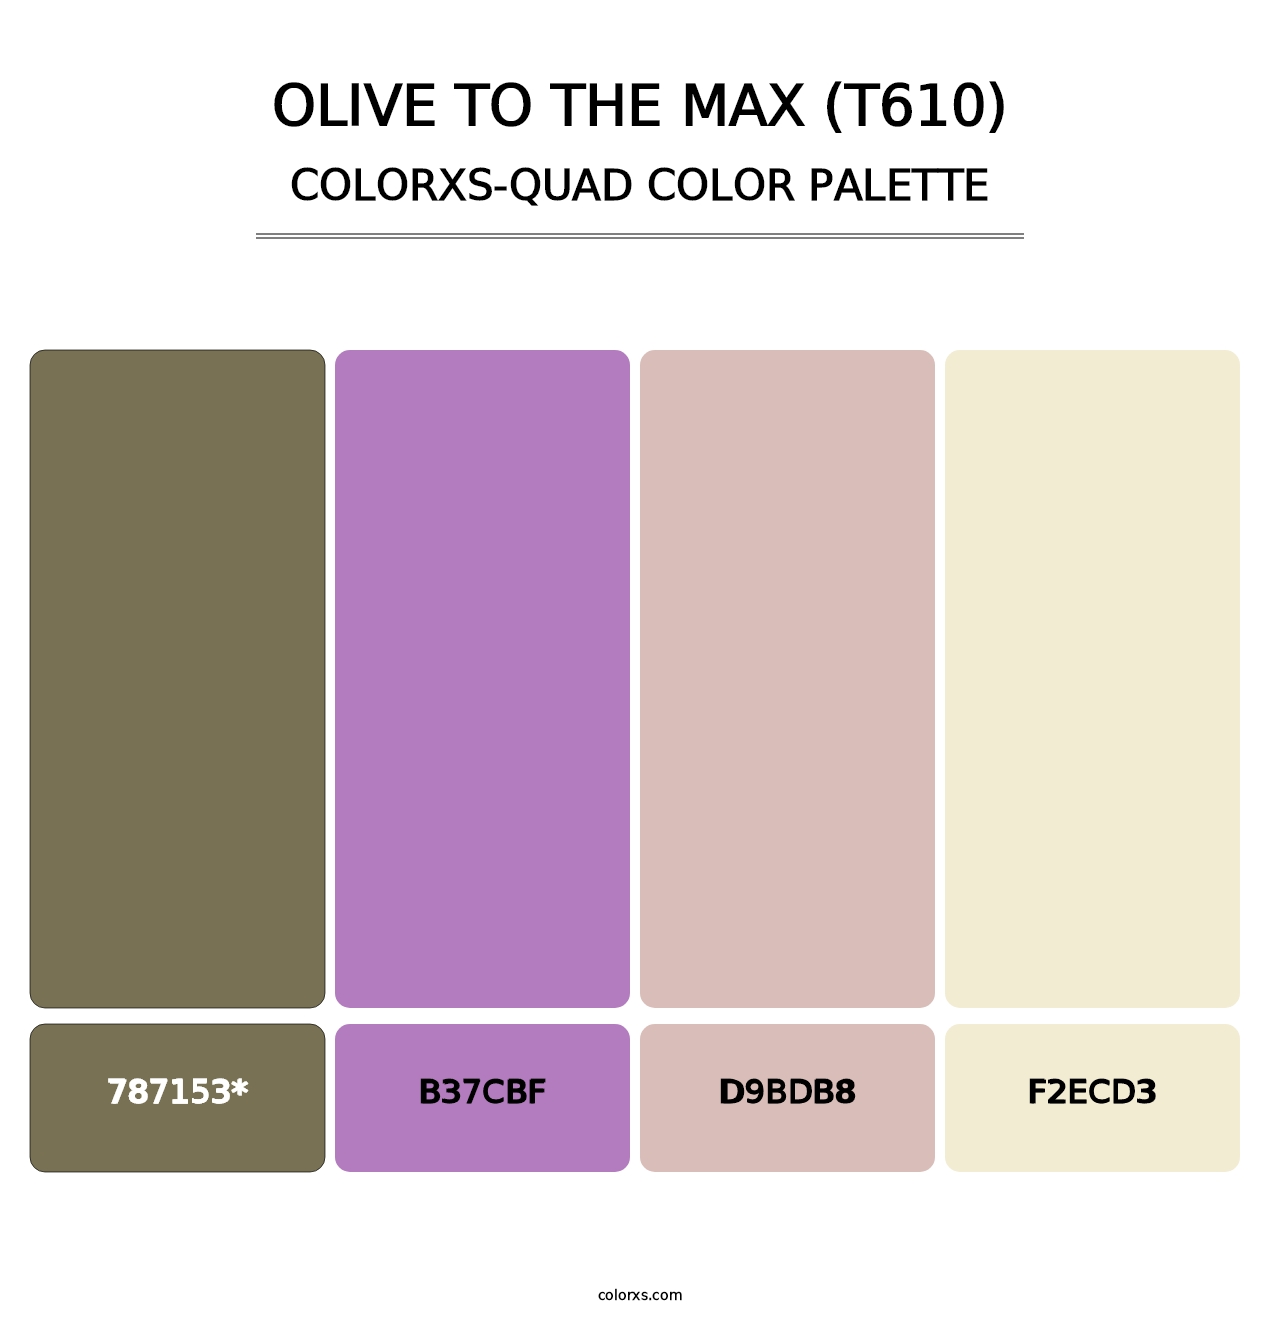 Olive to the Max (T610) - Colorxs Quad Palette